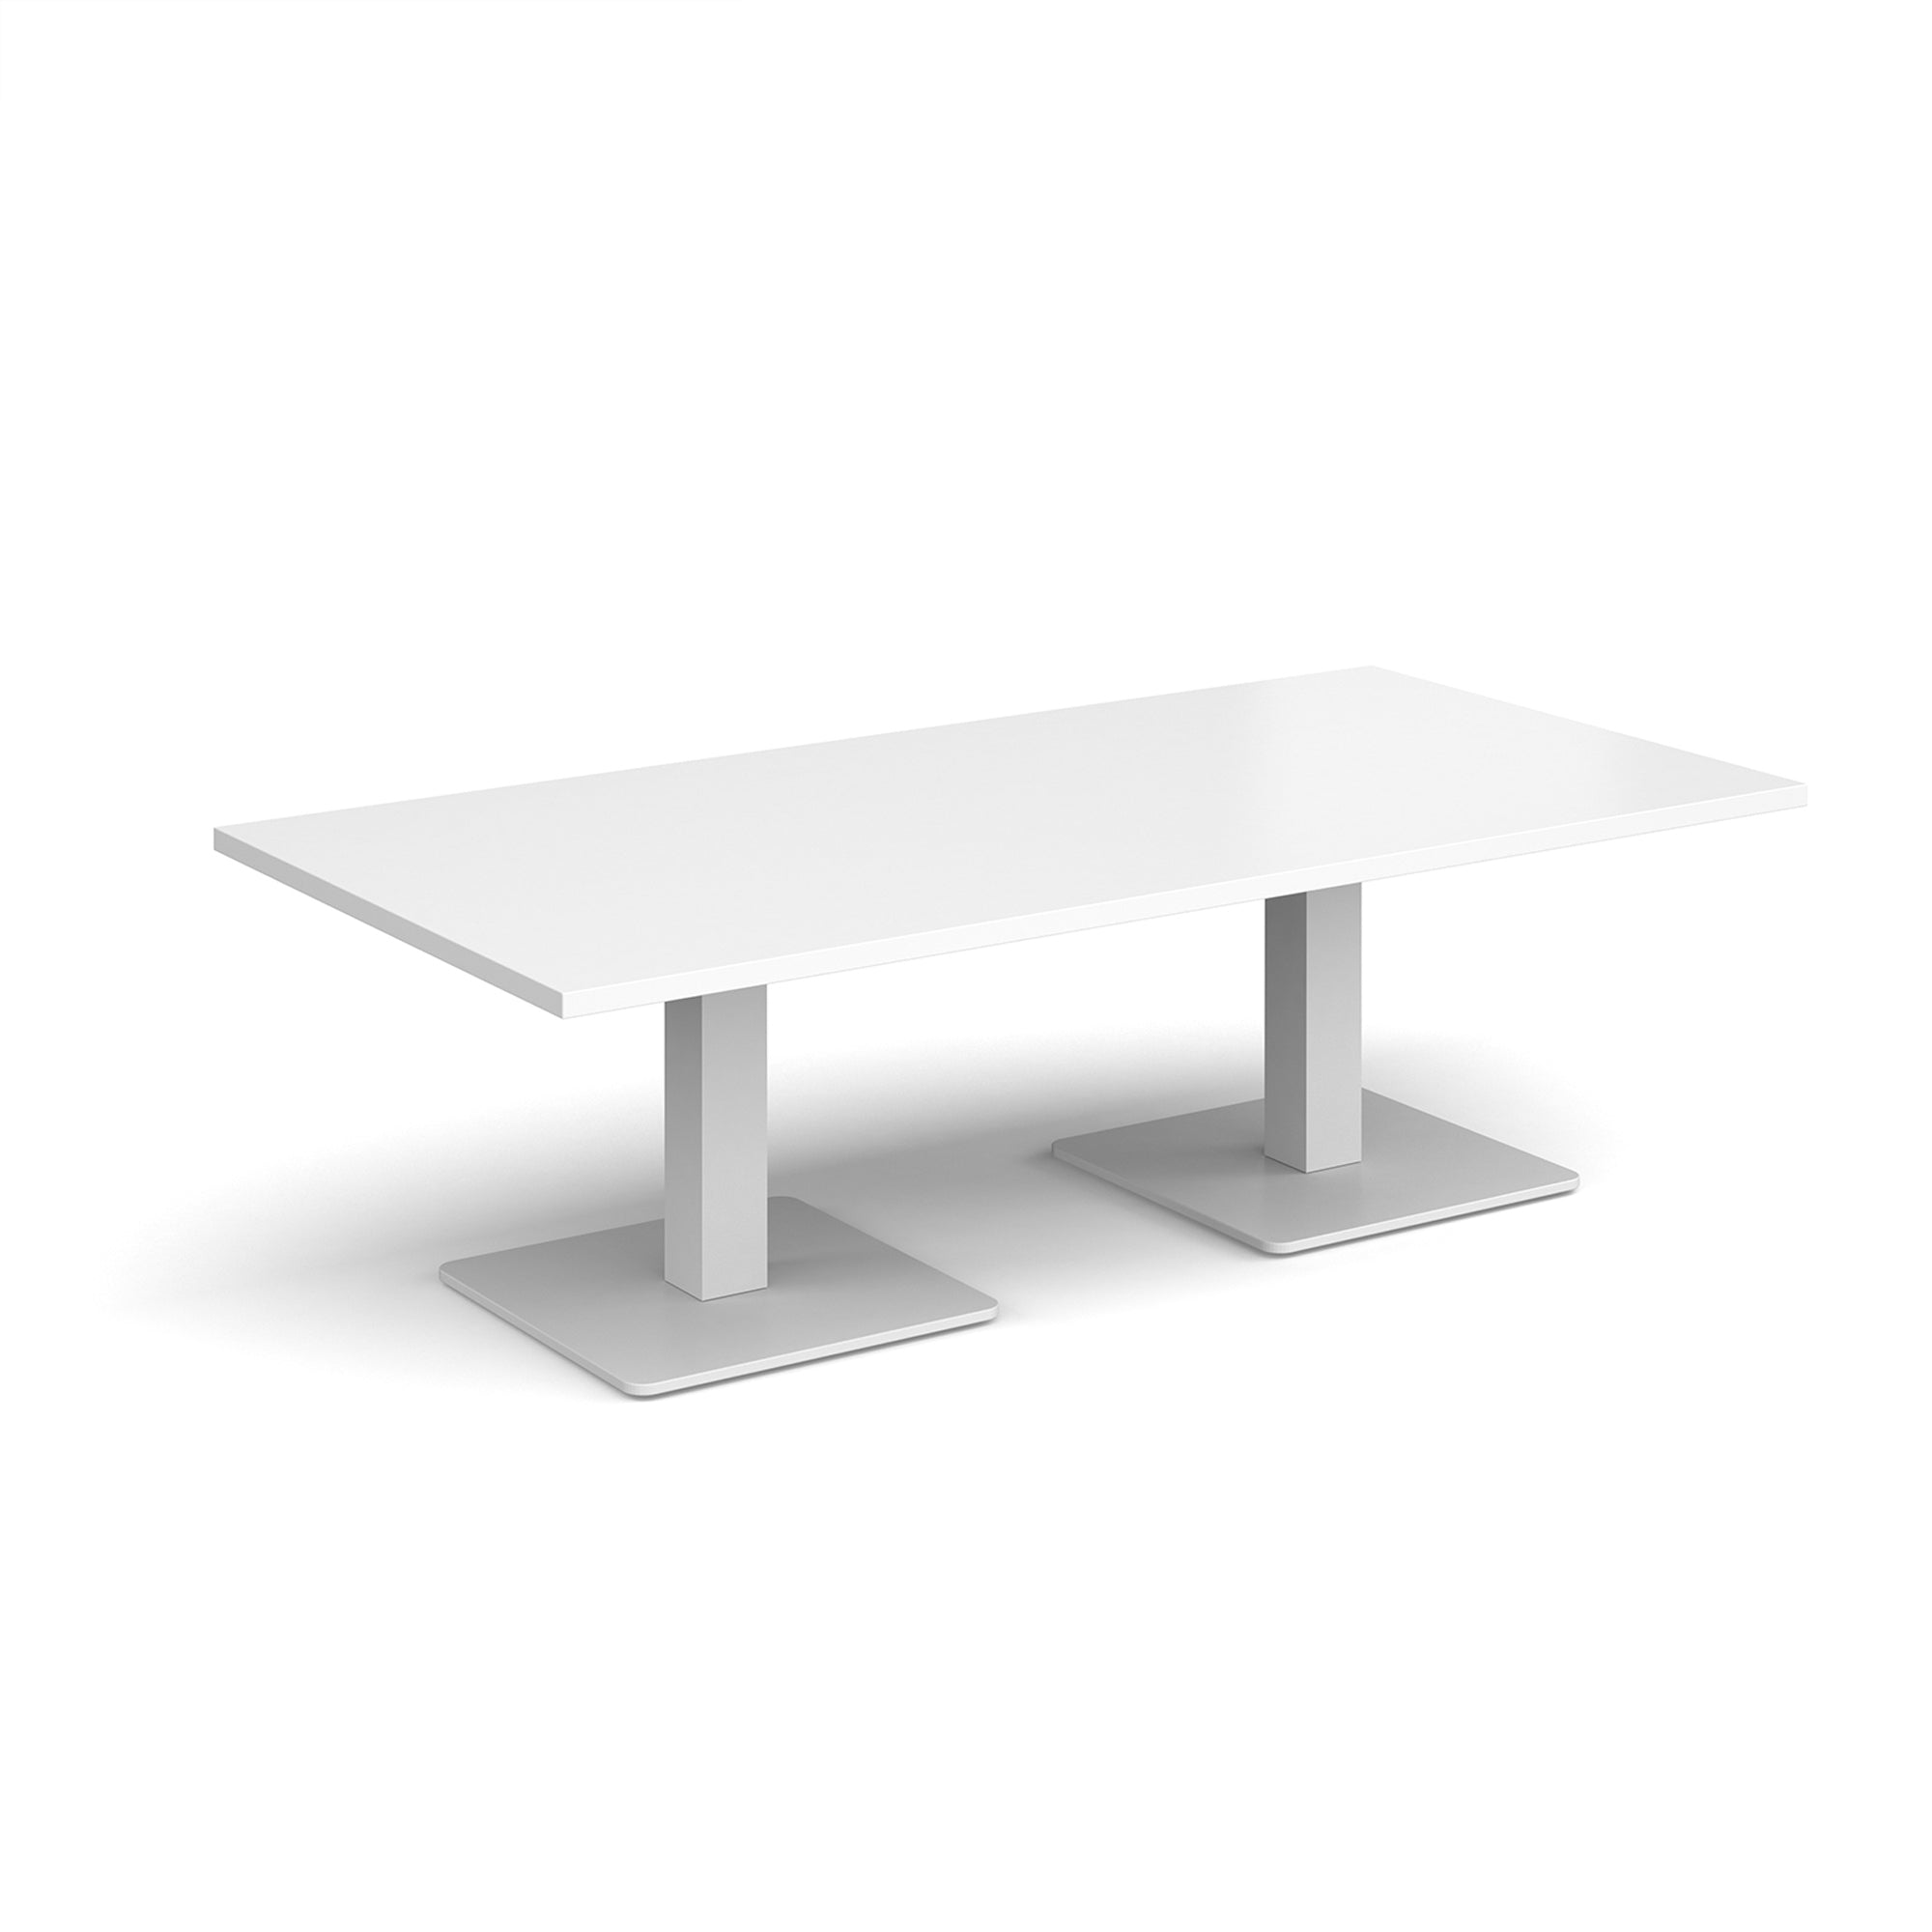 Brescia rectangular coffee table - Office Products Online